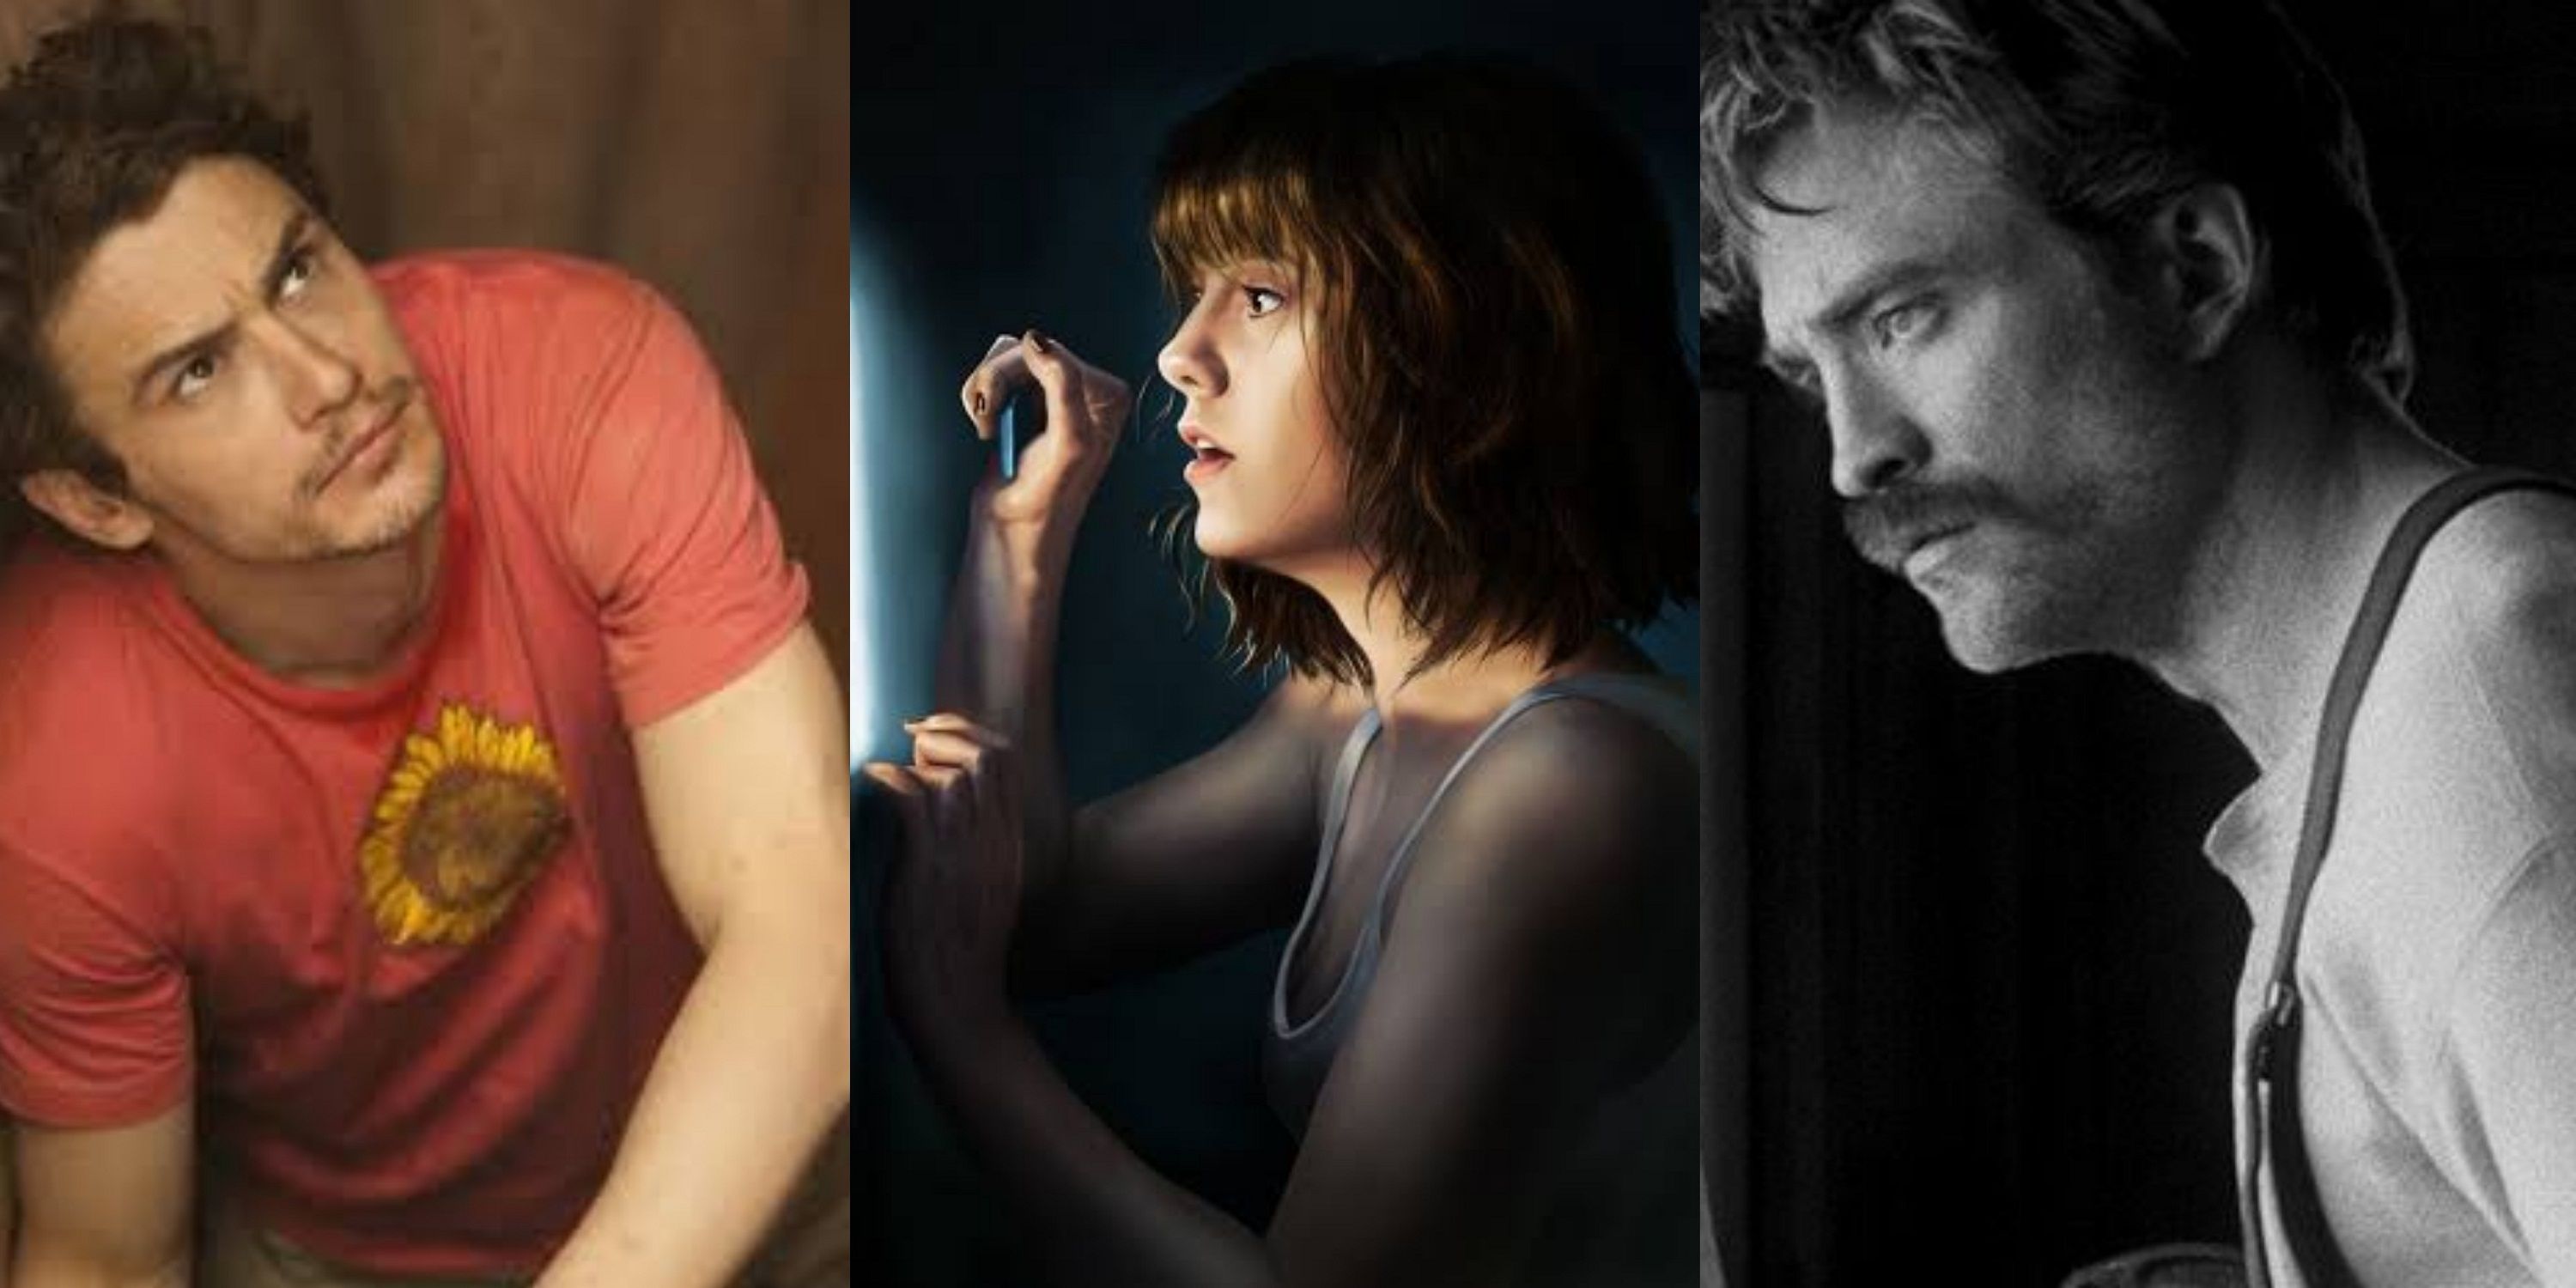 James Franco in 127 Hours, Mary Elizabeth Winstead in 10 Cloverfield Lane, and Robert Pattinson in The Lighthouse